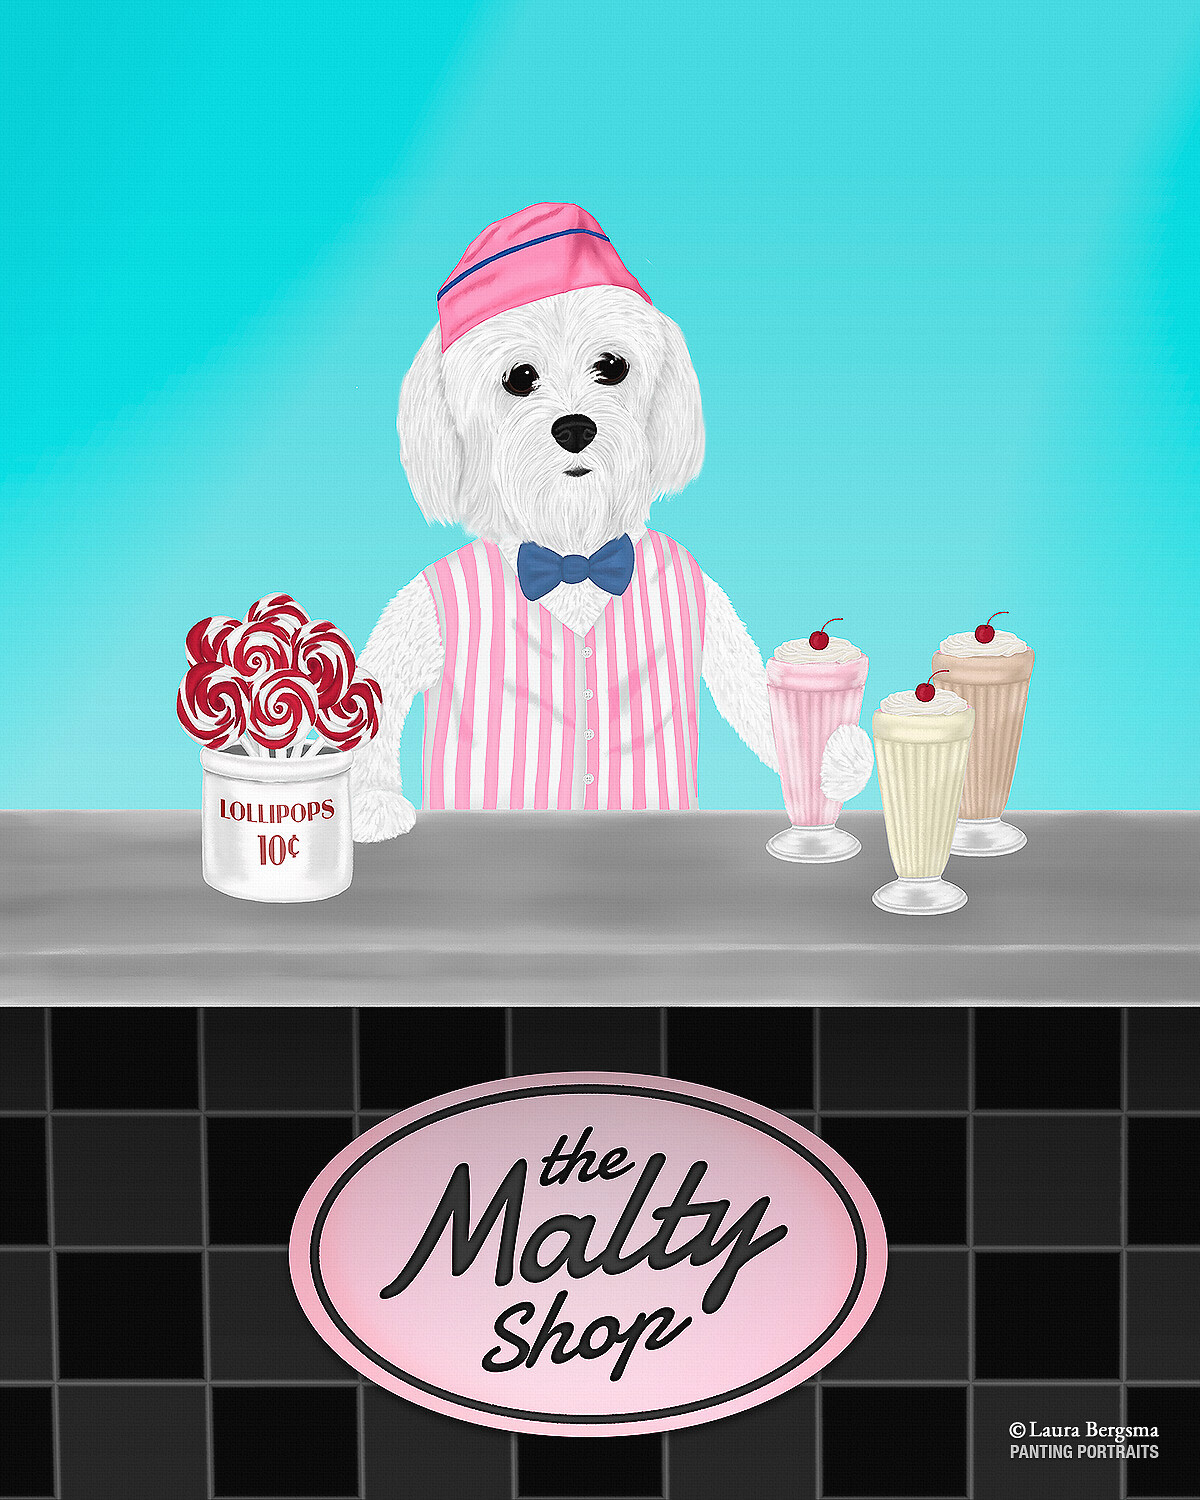 Boy Maltese painting, working at the malt shop counter